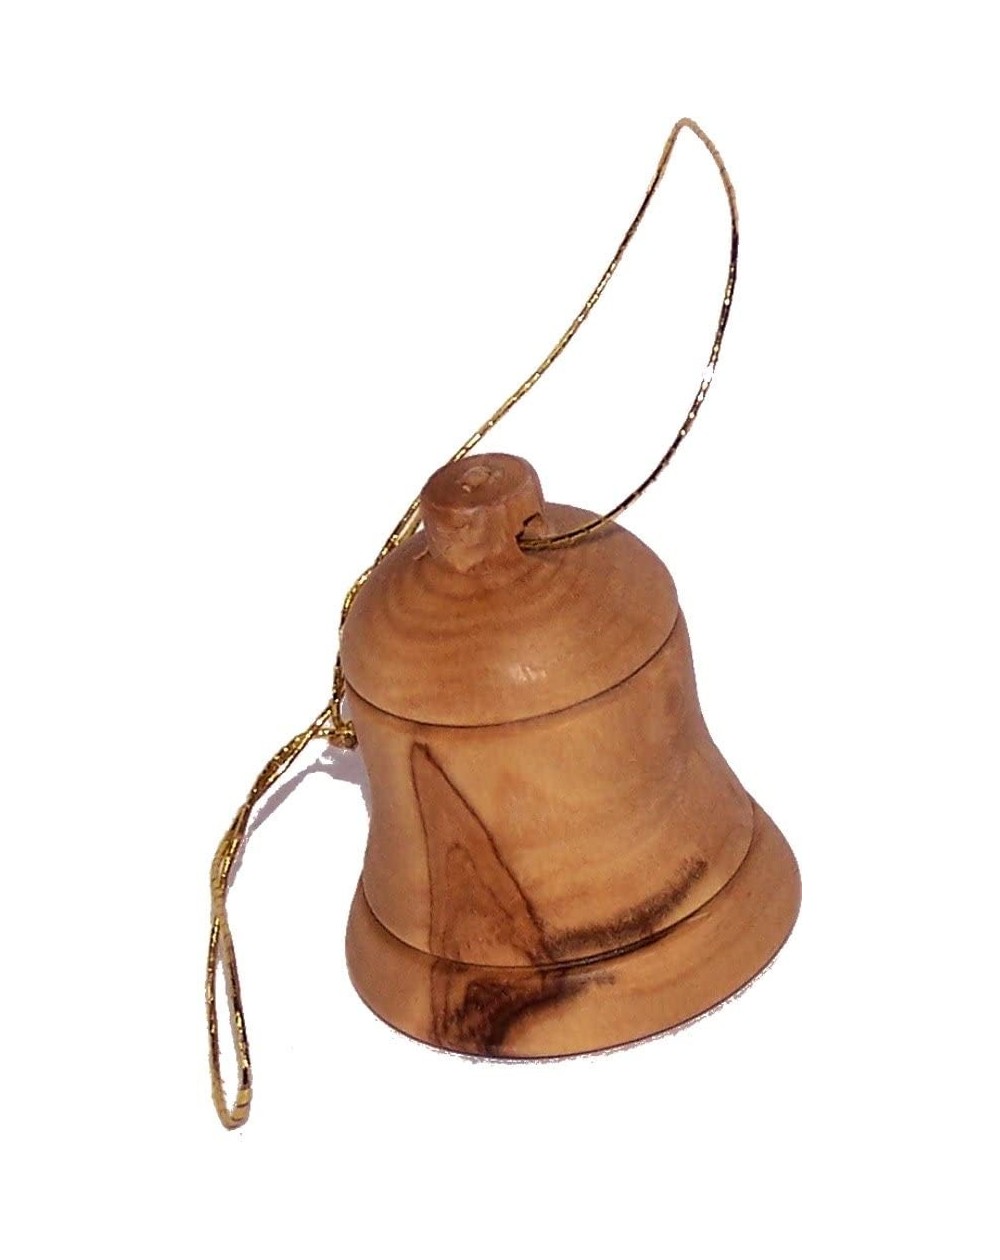 Ornaments Olive Wood Ornaments - Small Bells - Christmas Tree Ornaments from The Holy Land (3- 1.5 Inches) - CS188M4592H $11.79